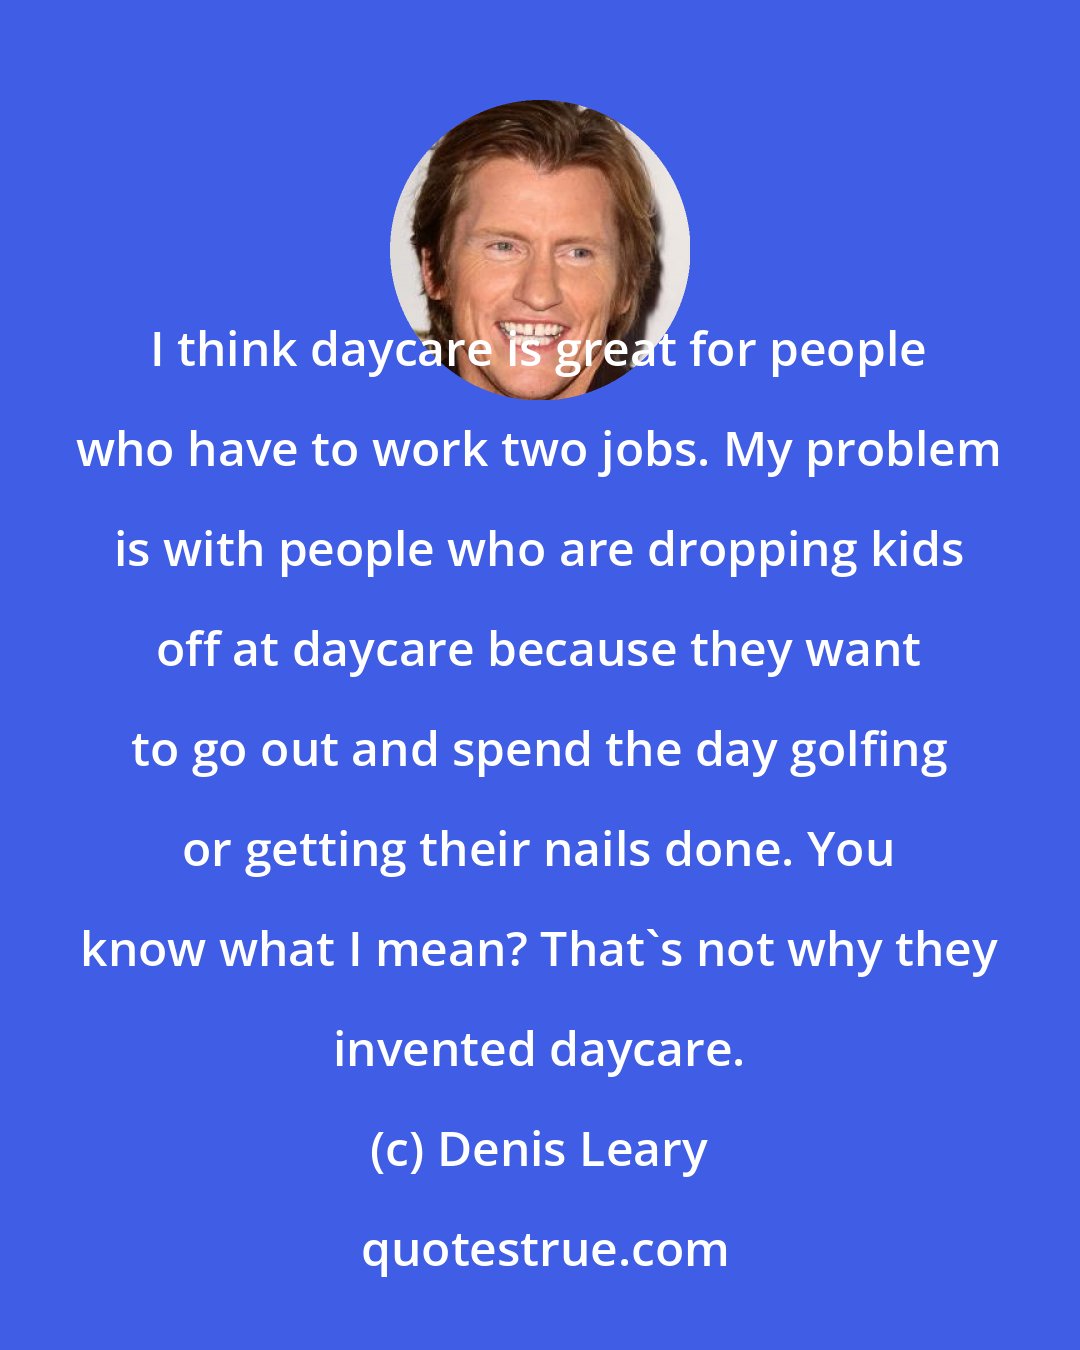 Denis Leary: I think daycare is great for people who have to work two jobs. My problem is with people who are dropping kids off at daycare because they want to go out and spend the day golfing or getting their nails done. You know what I mean? That's not why they invented daycare.